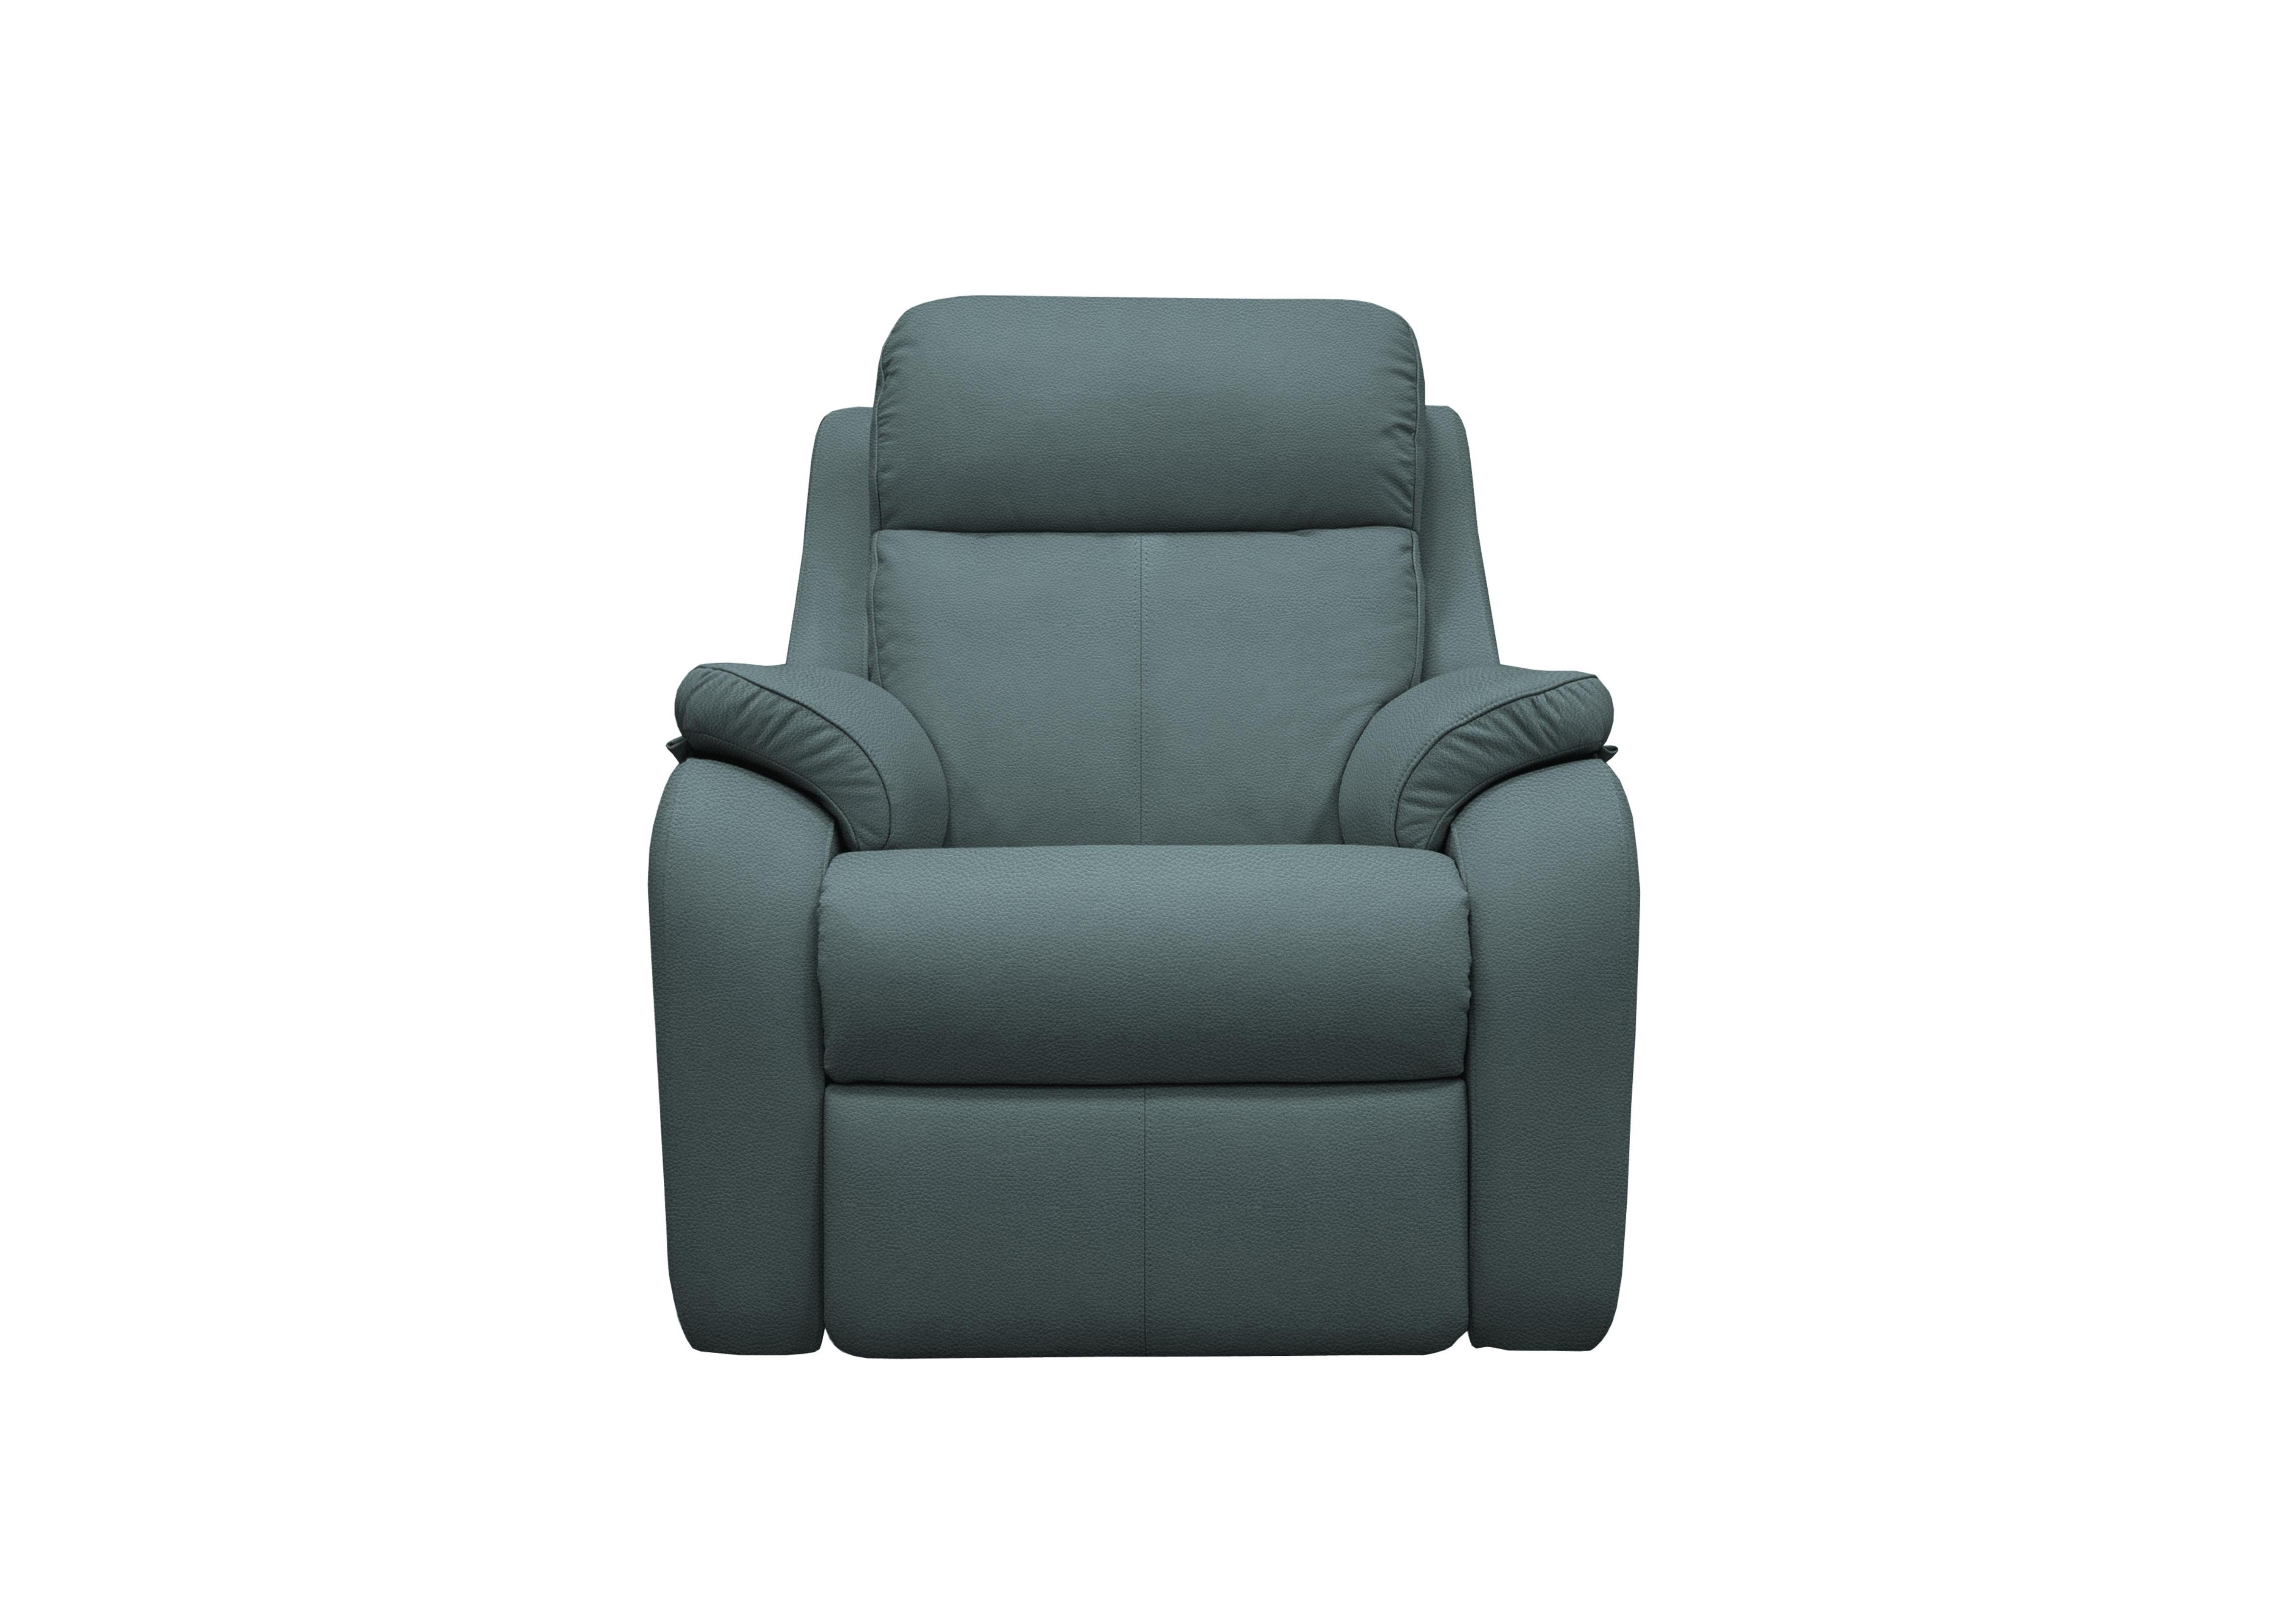 Kingsbury Leather Power Recliner Armchair with Power Headrests in L852 Cambridge Petrol Blue on Furniture Village